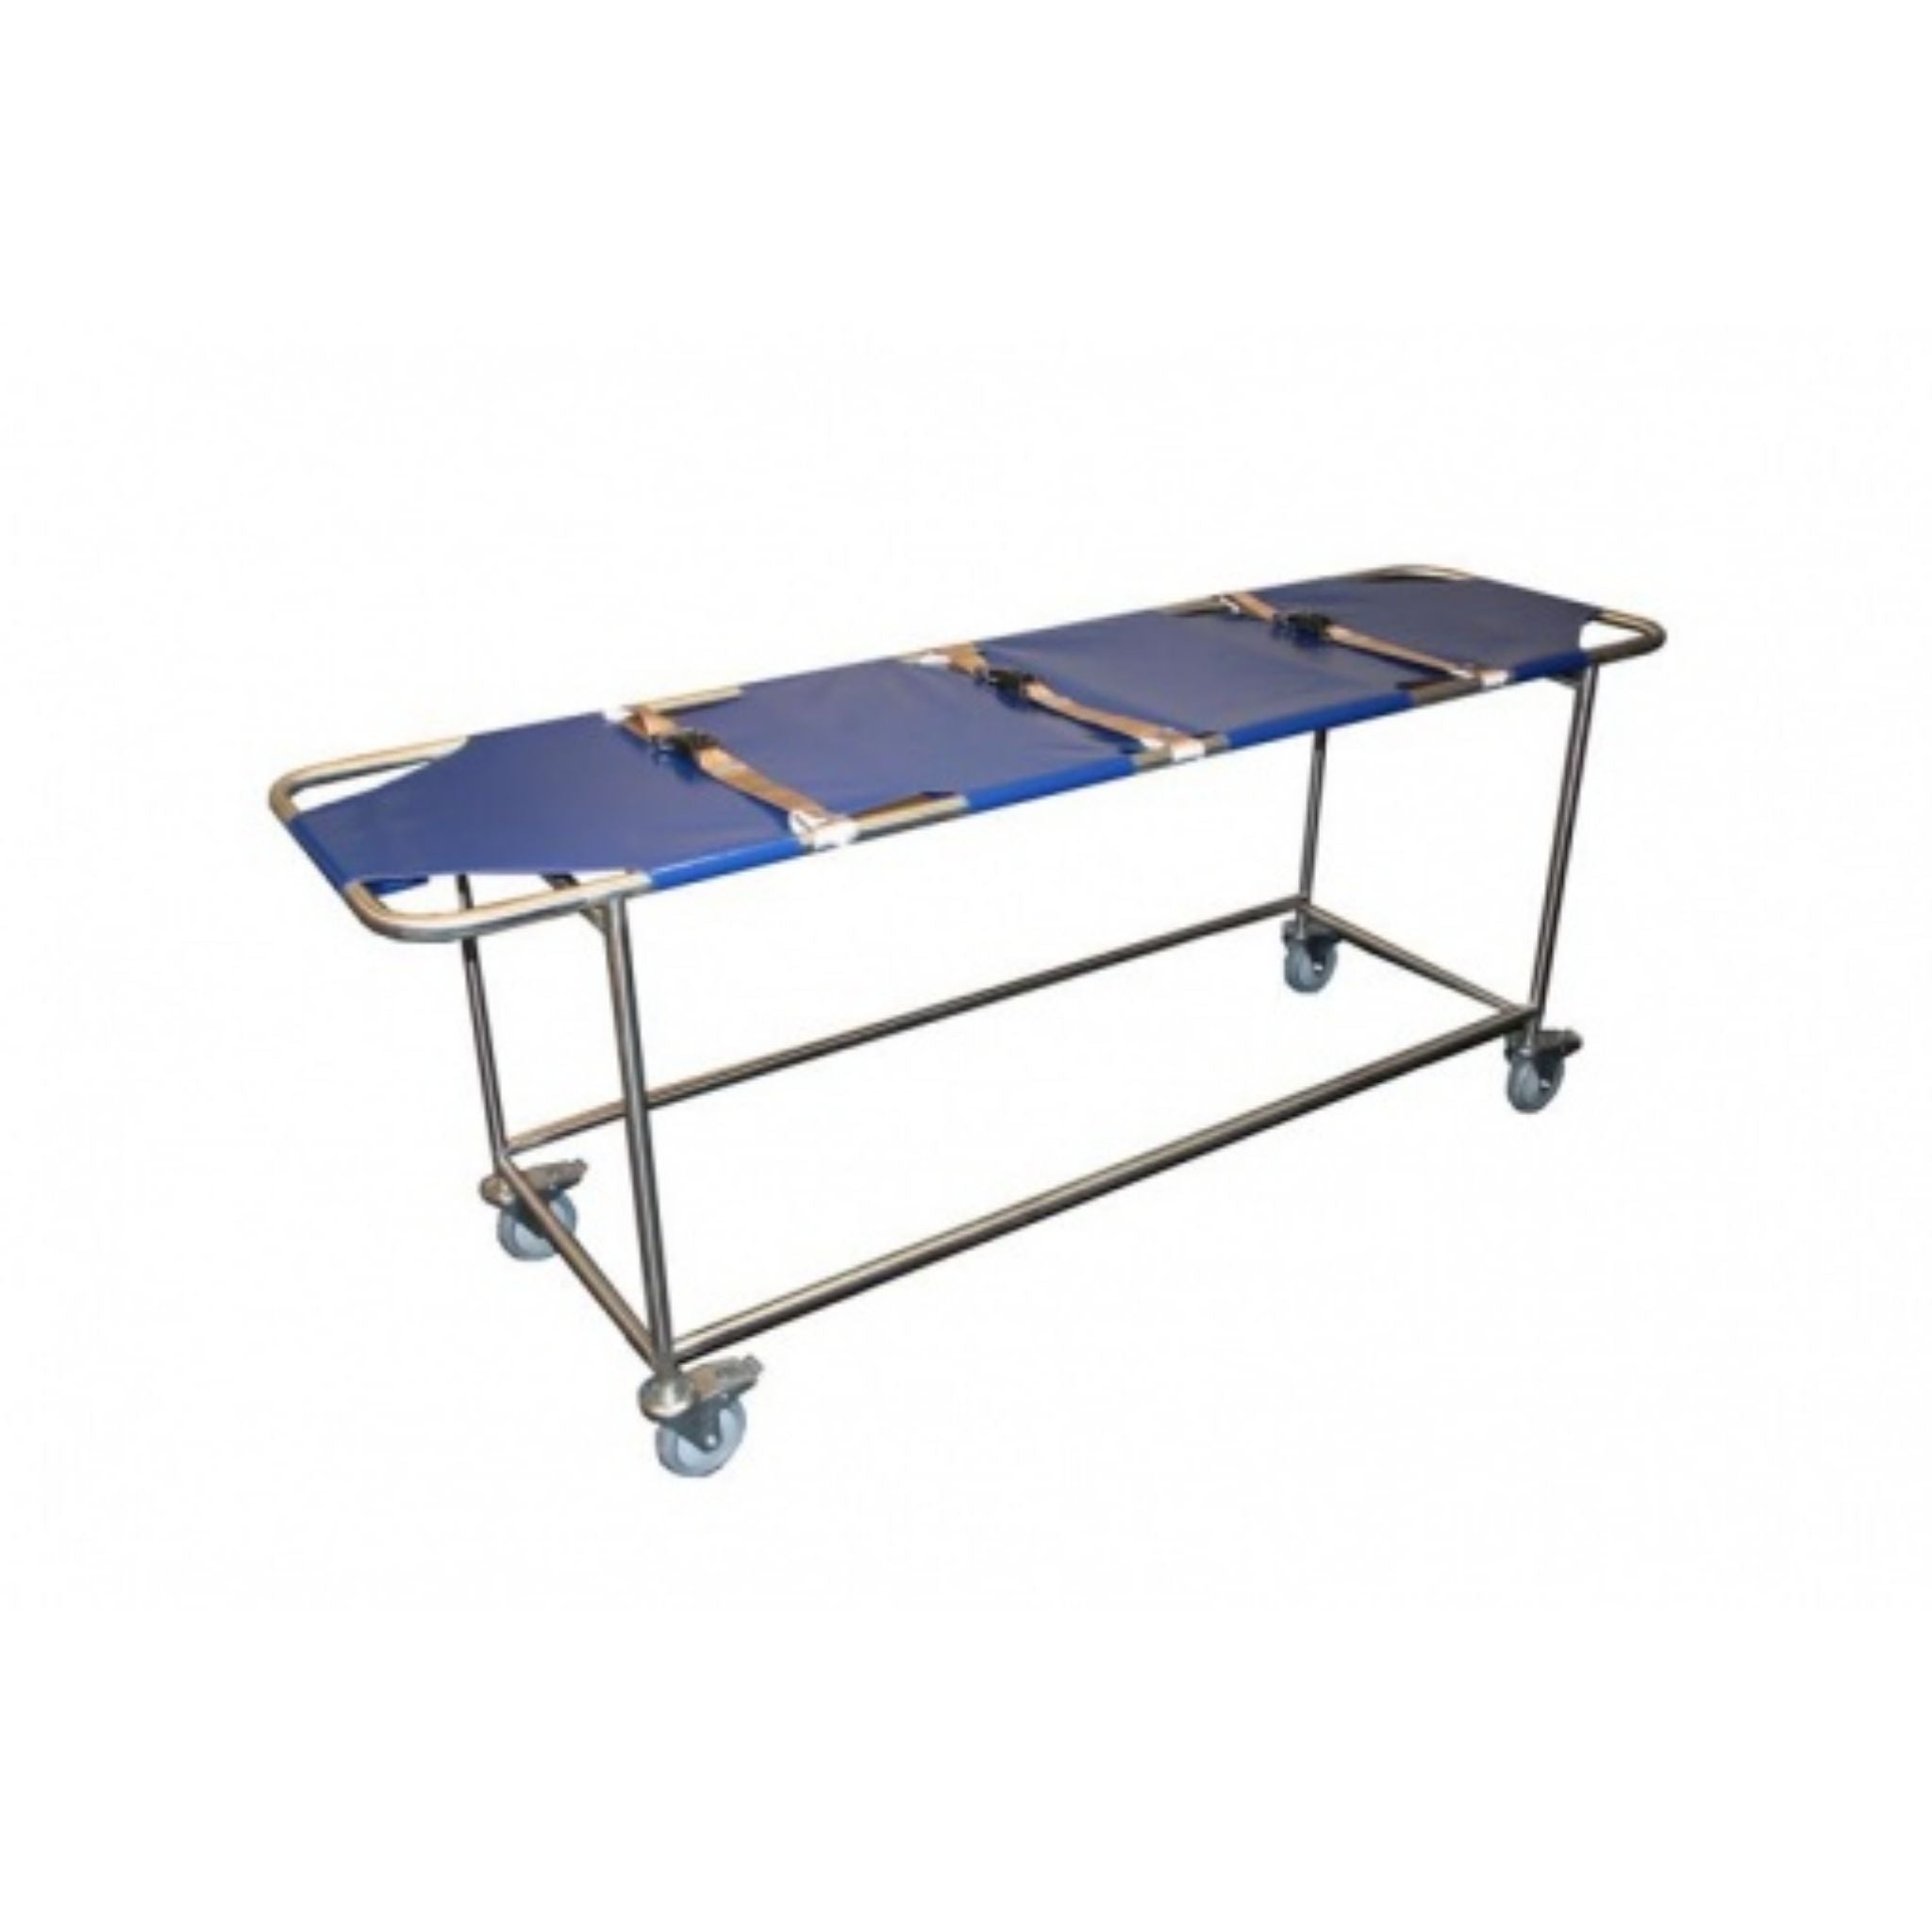 Stainless steel transport trolley